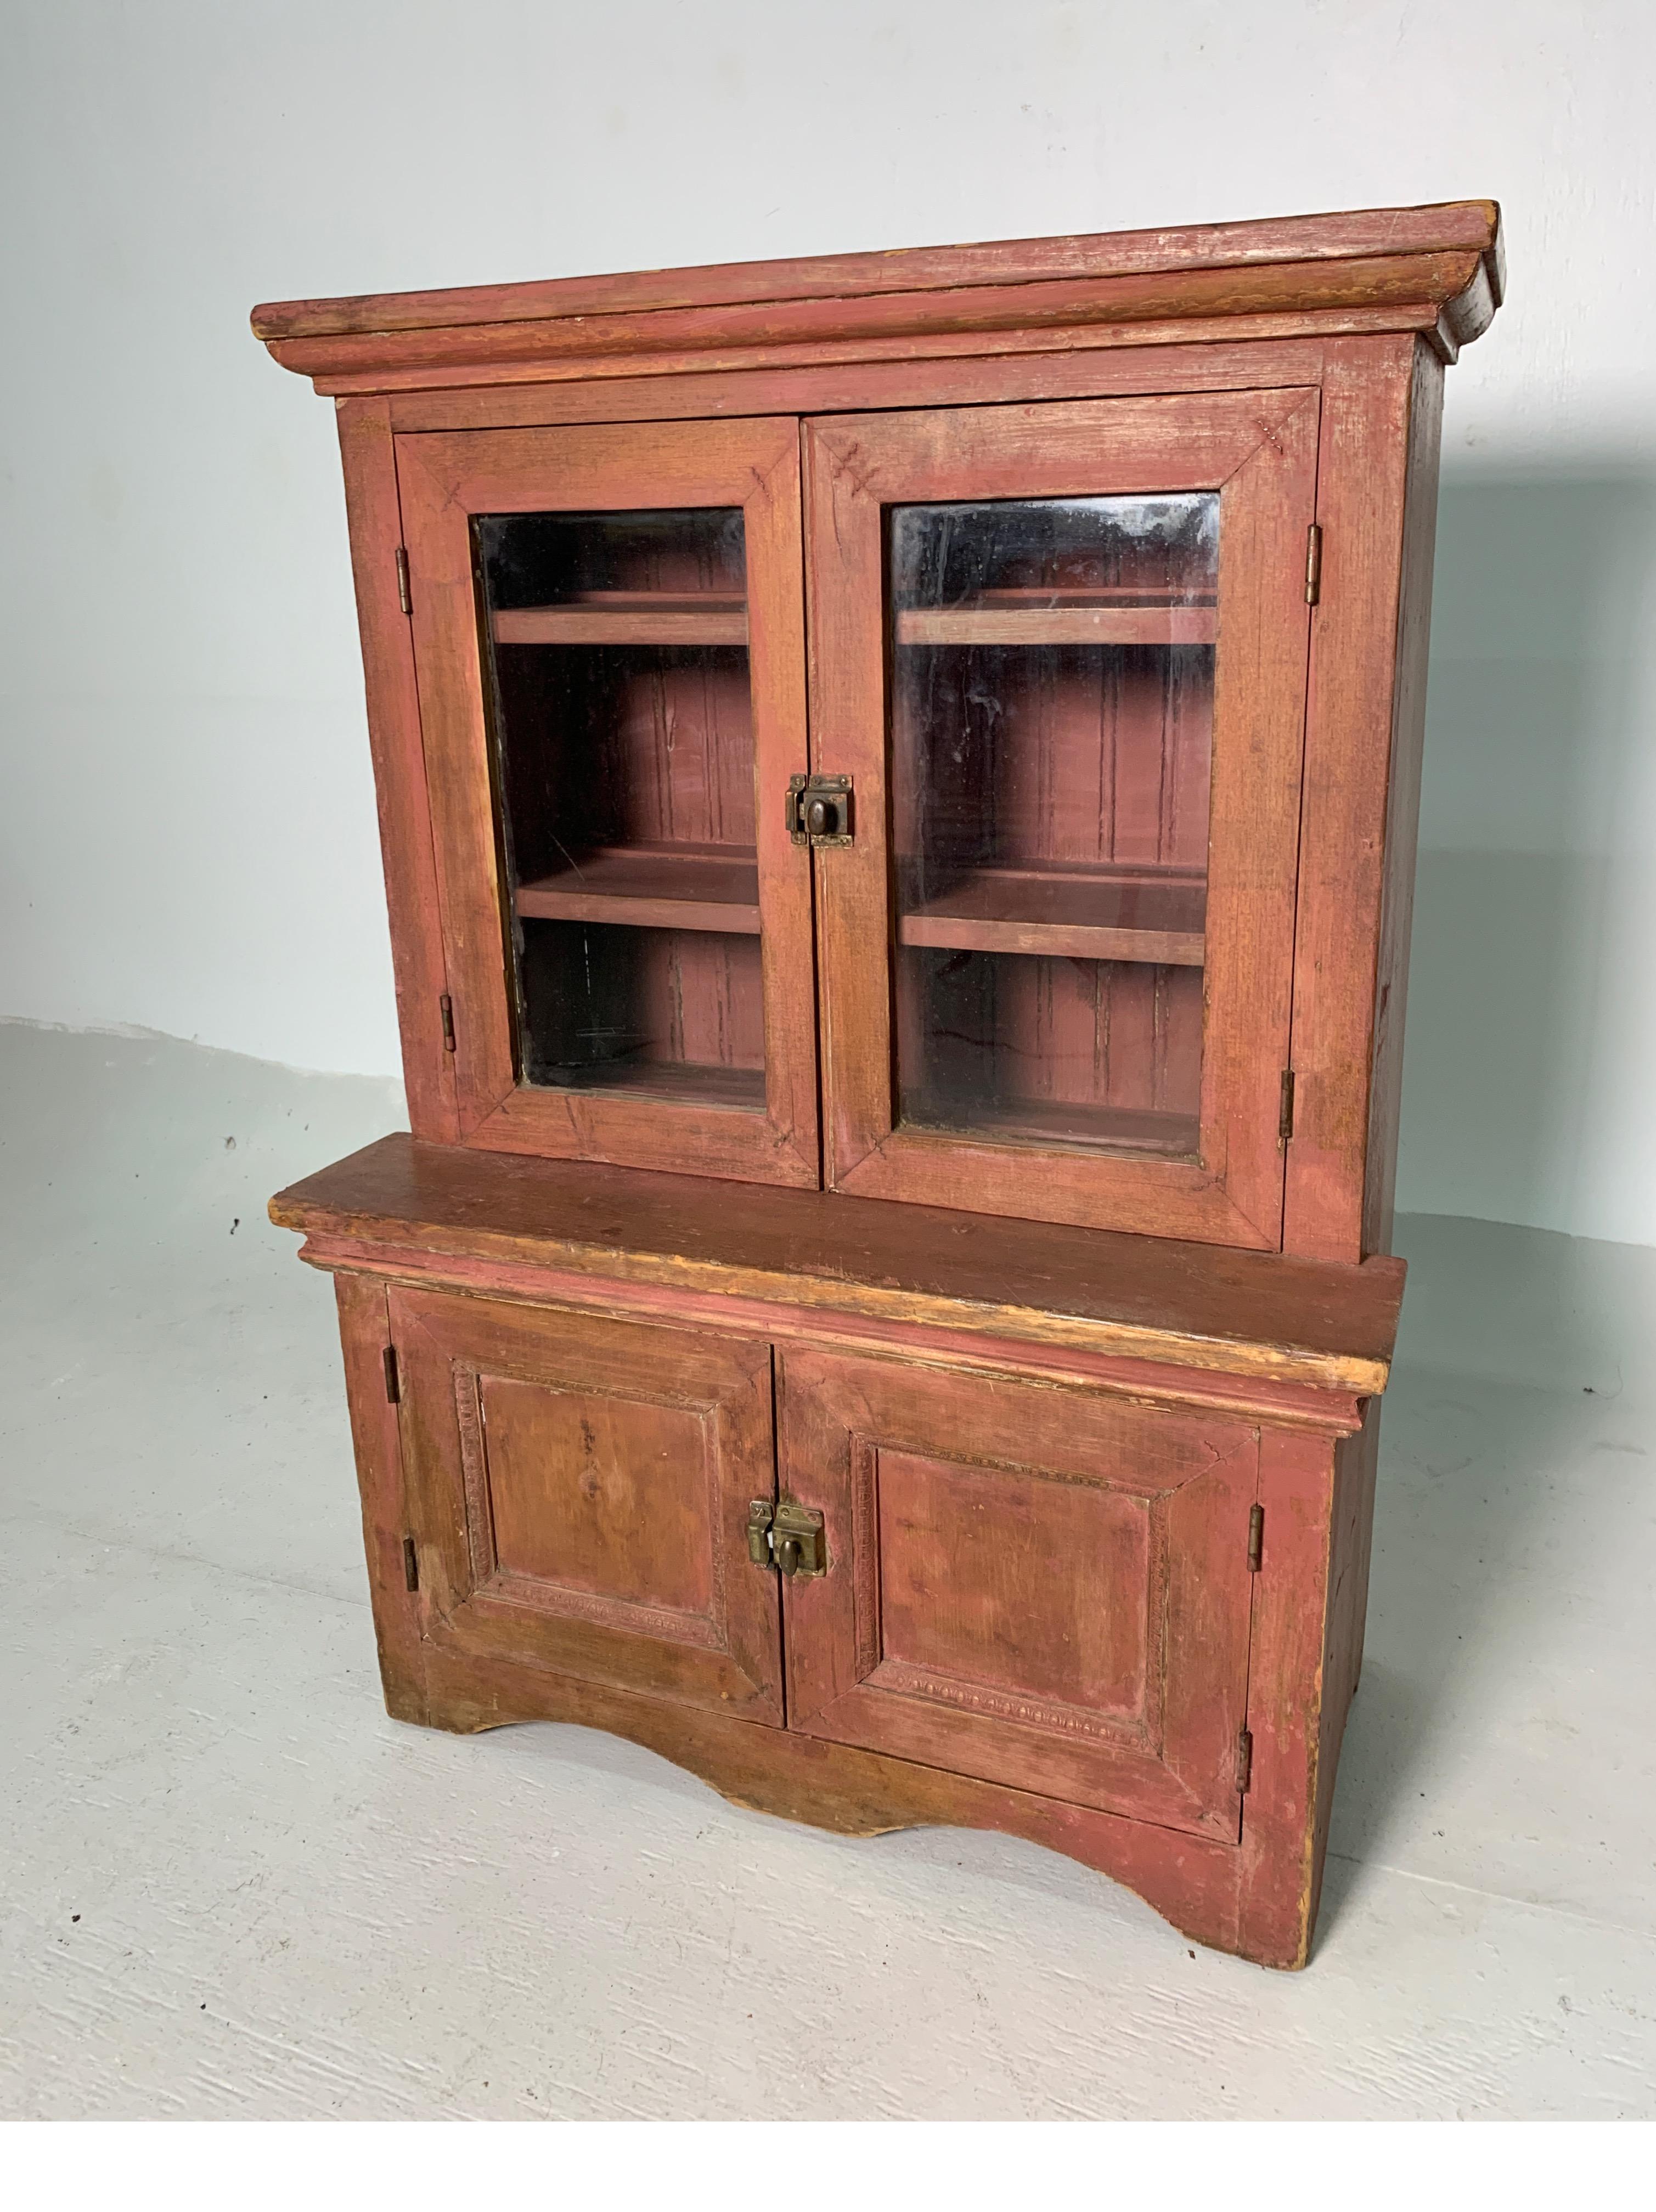 Large, child's wooden cupboard with glass-pained doors and lower cabinet, older brick dust paint finish and original hardware.